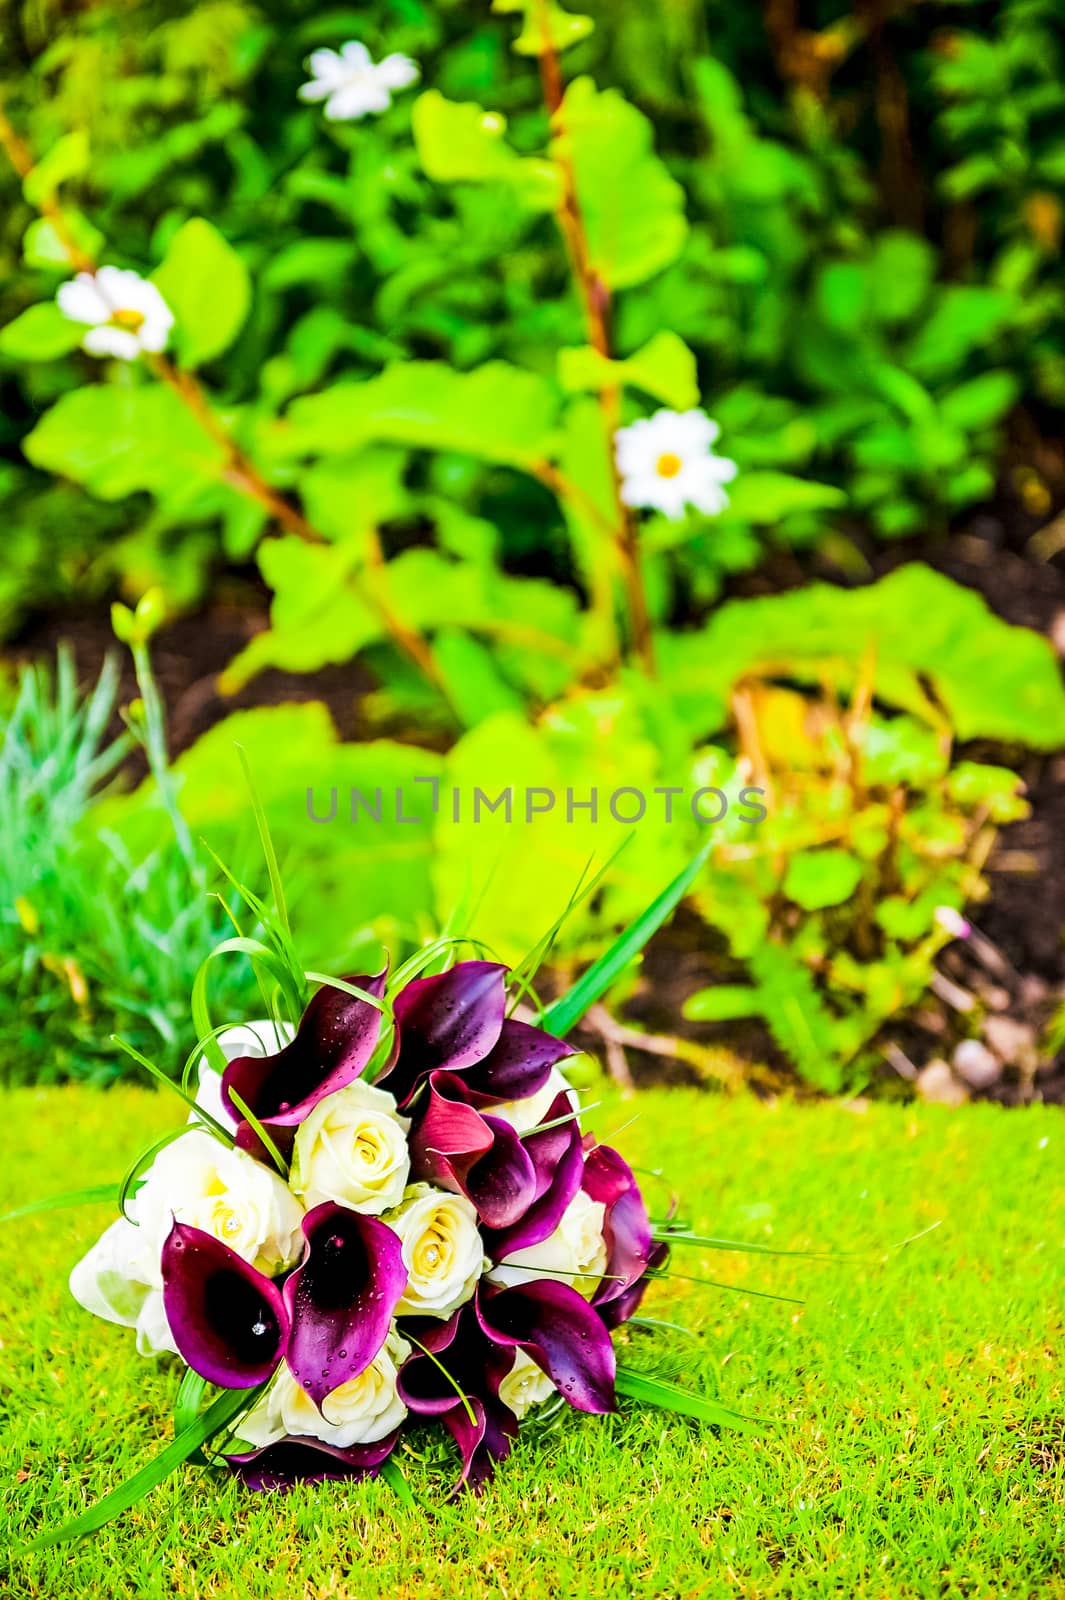 picture of a wedding bouquet , Wedding bouquet of purple Calla lilies on the grass by paddythegolfer